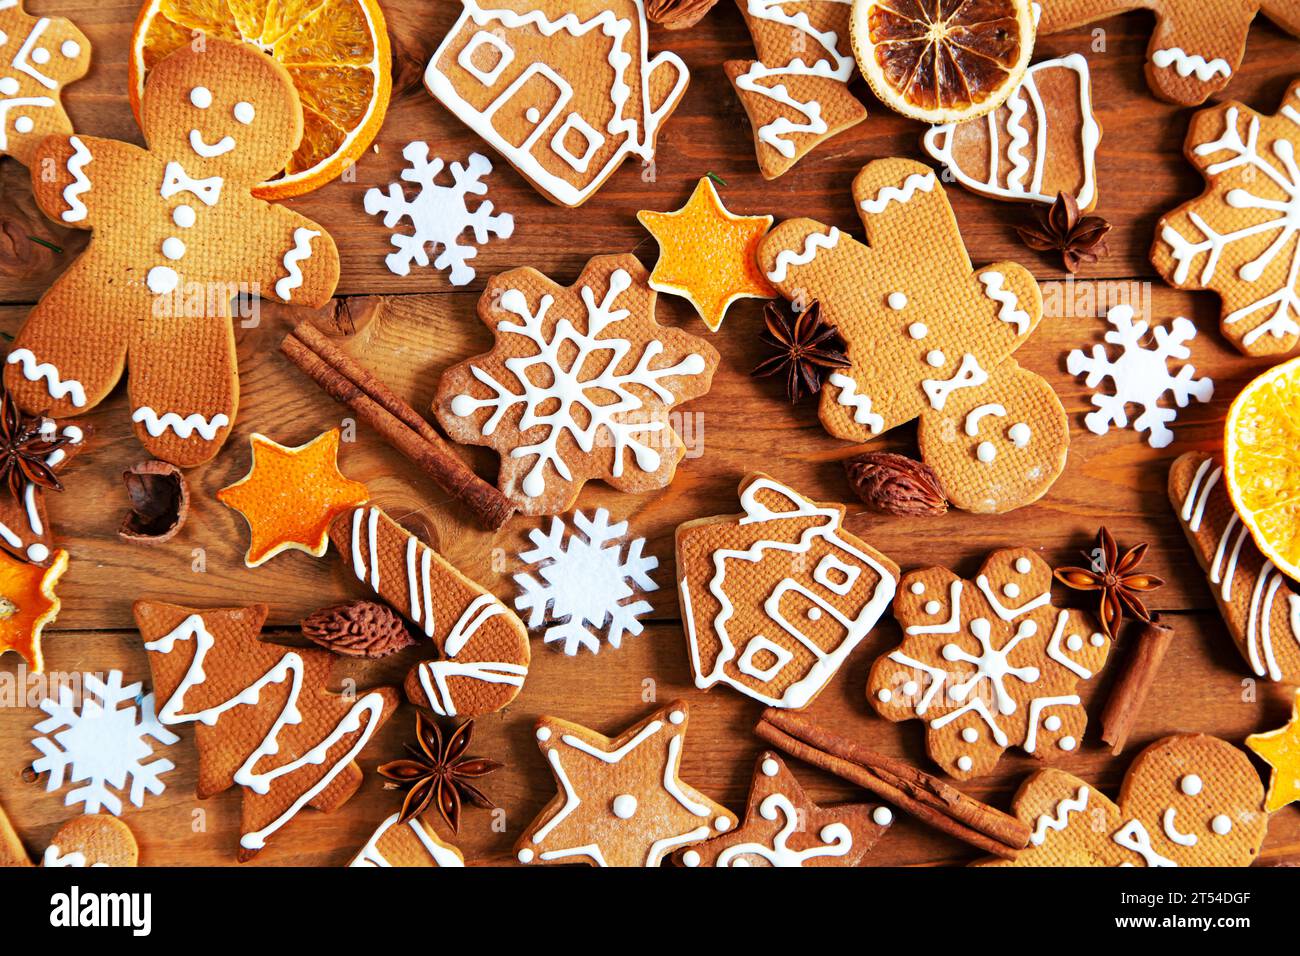 Christmas homemade gingerbread cookies and spices on a wooden background. Stock Photo